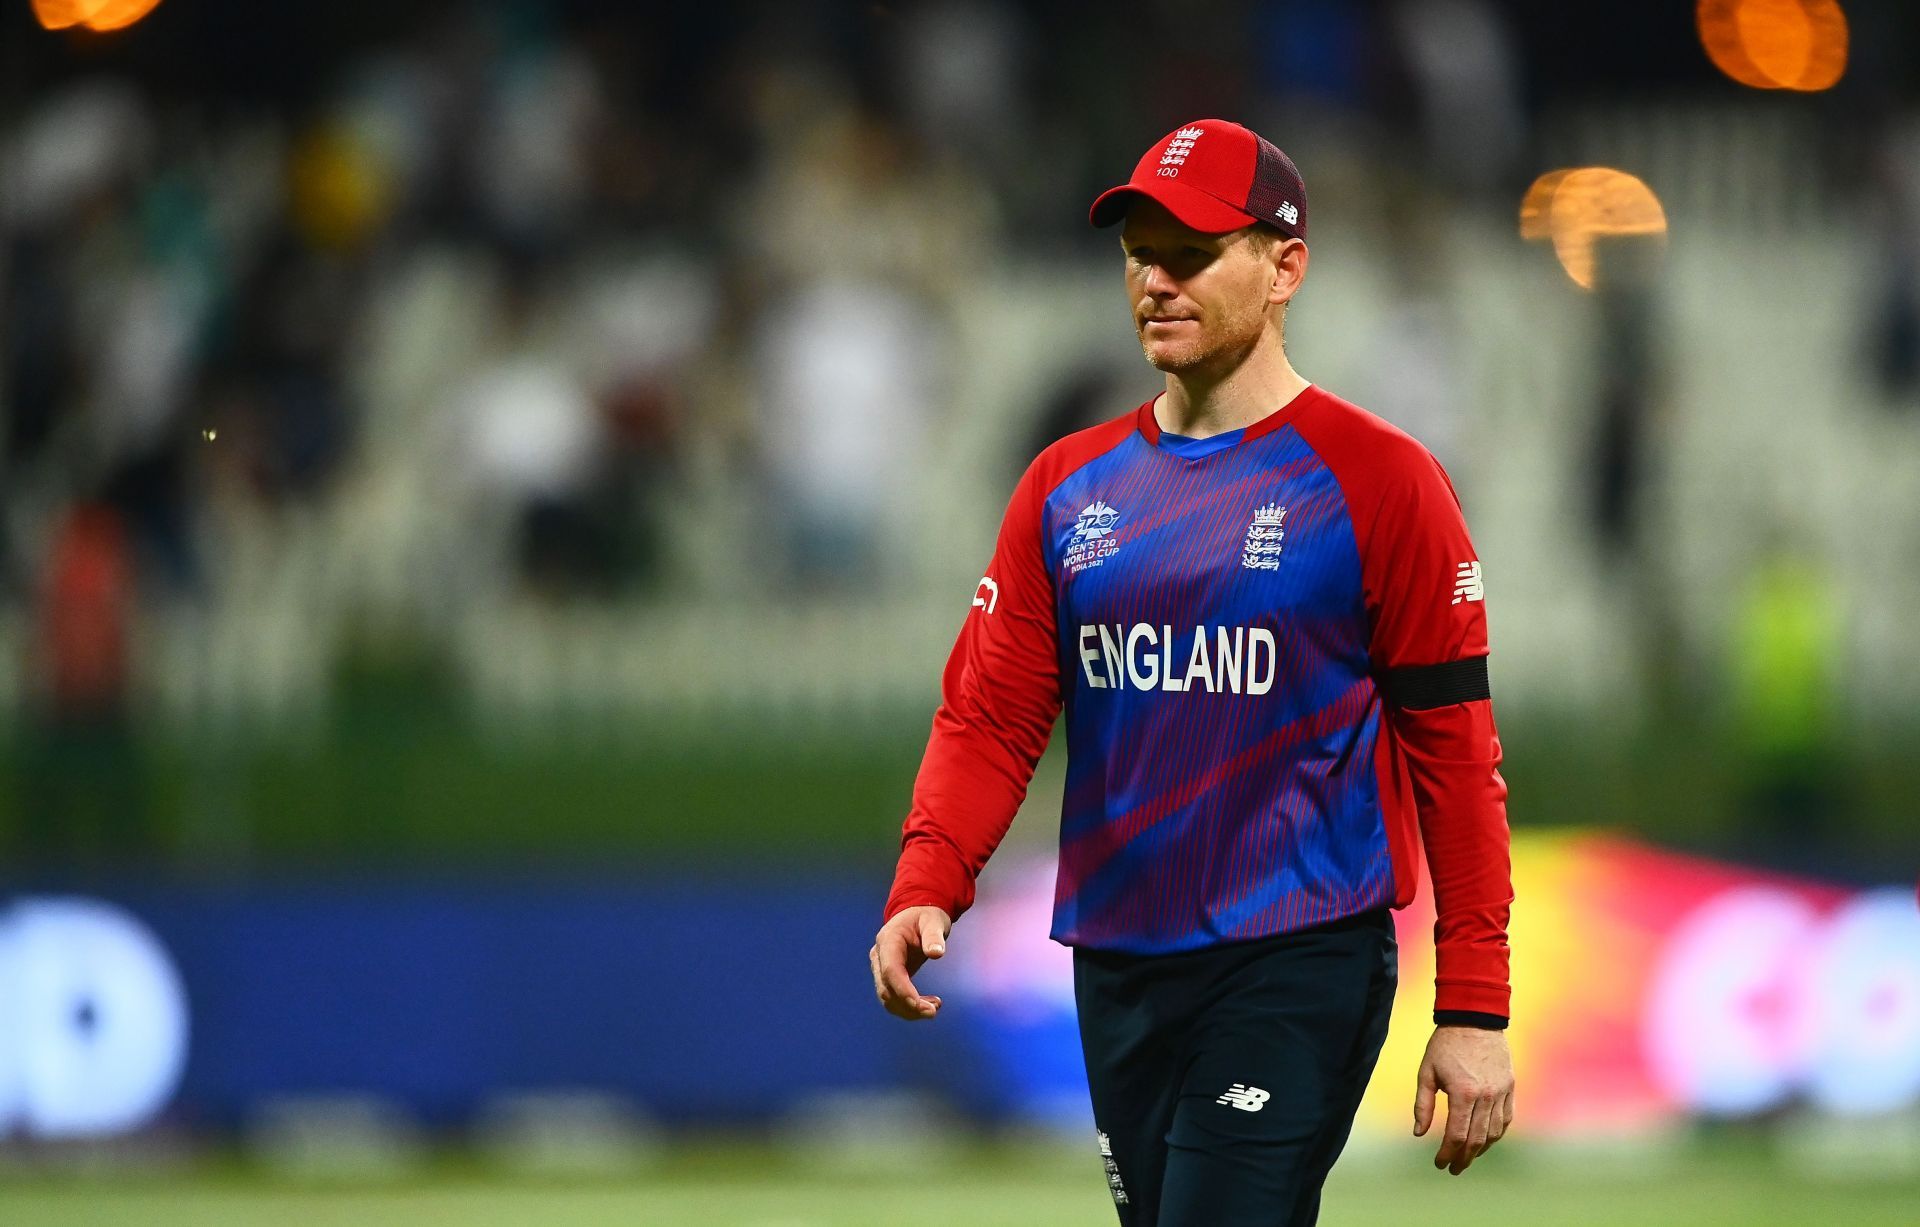 Eoin Morgan believes England are joint second favorites to win the T20 World Cup this year